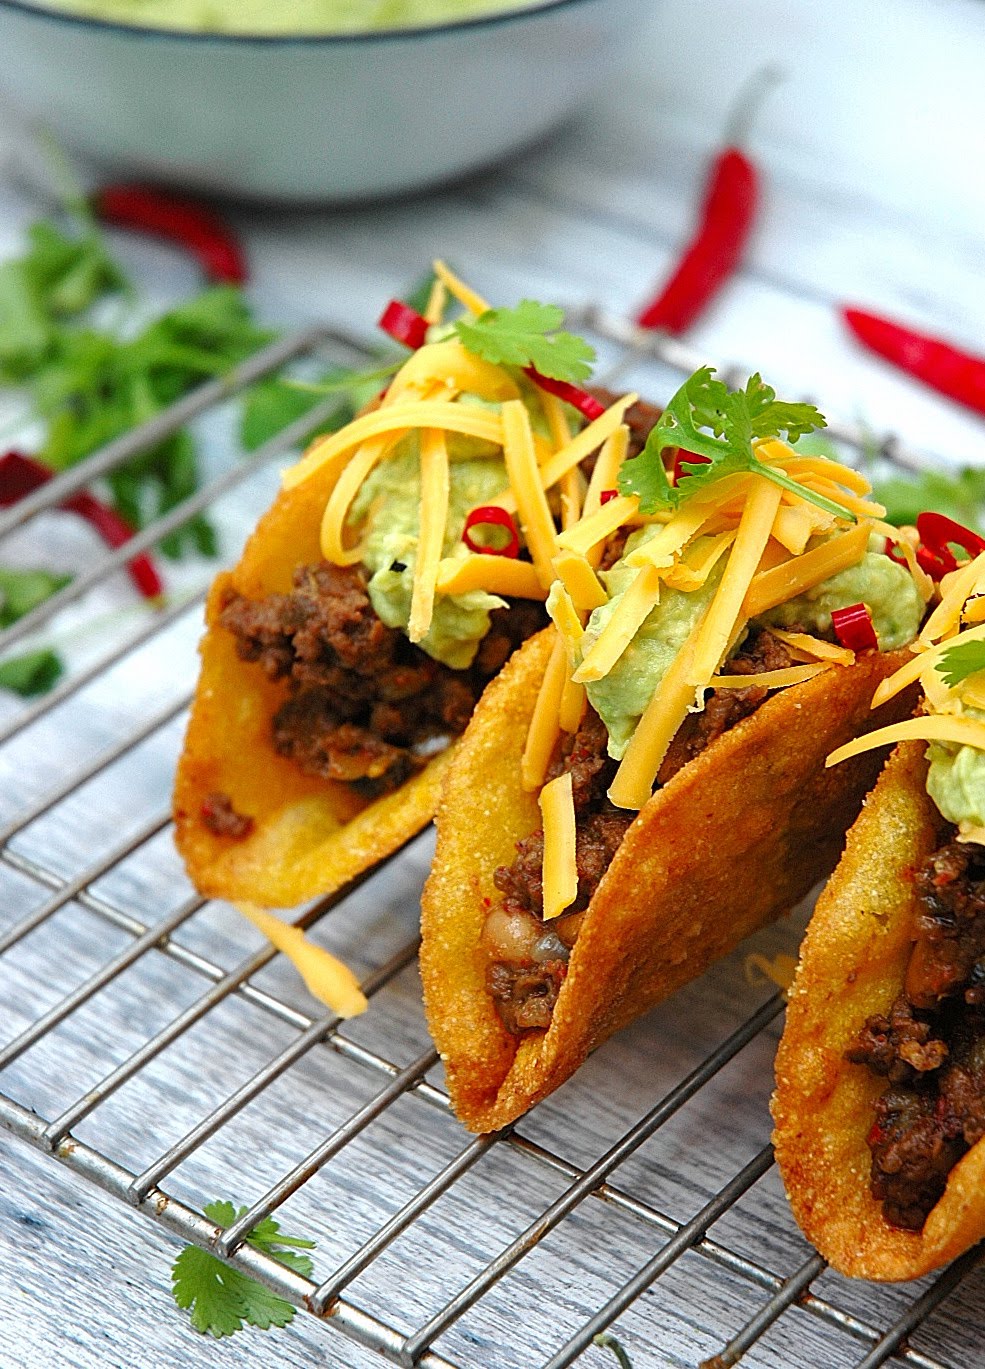 Beef Tacos - I think I'm beginning to like Mexican Food!